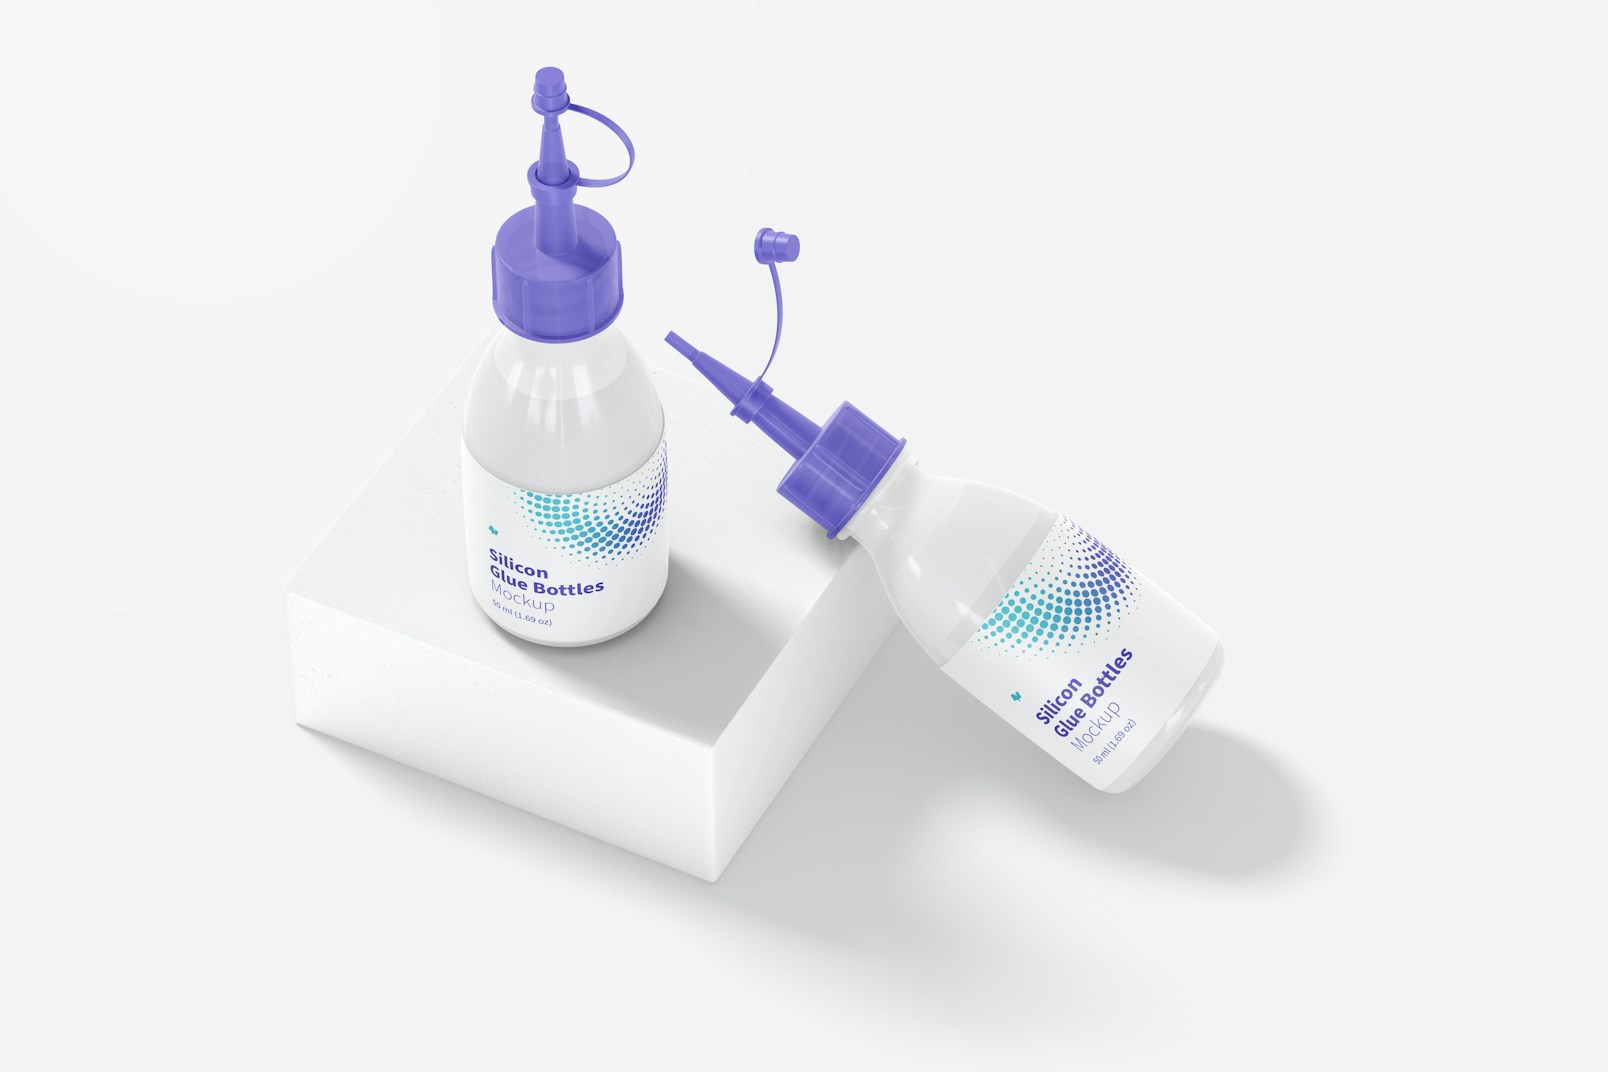 Silicon Glue Bottles Mockup, Perspective View